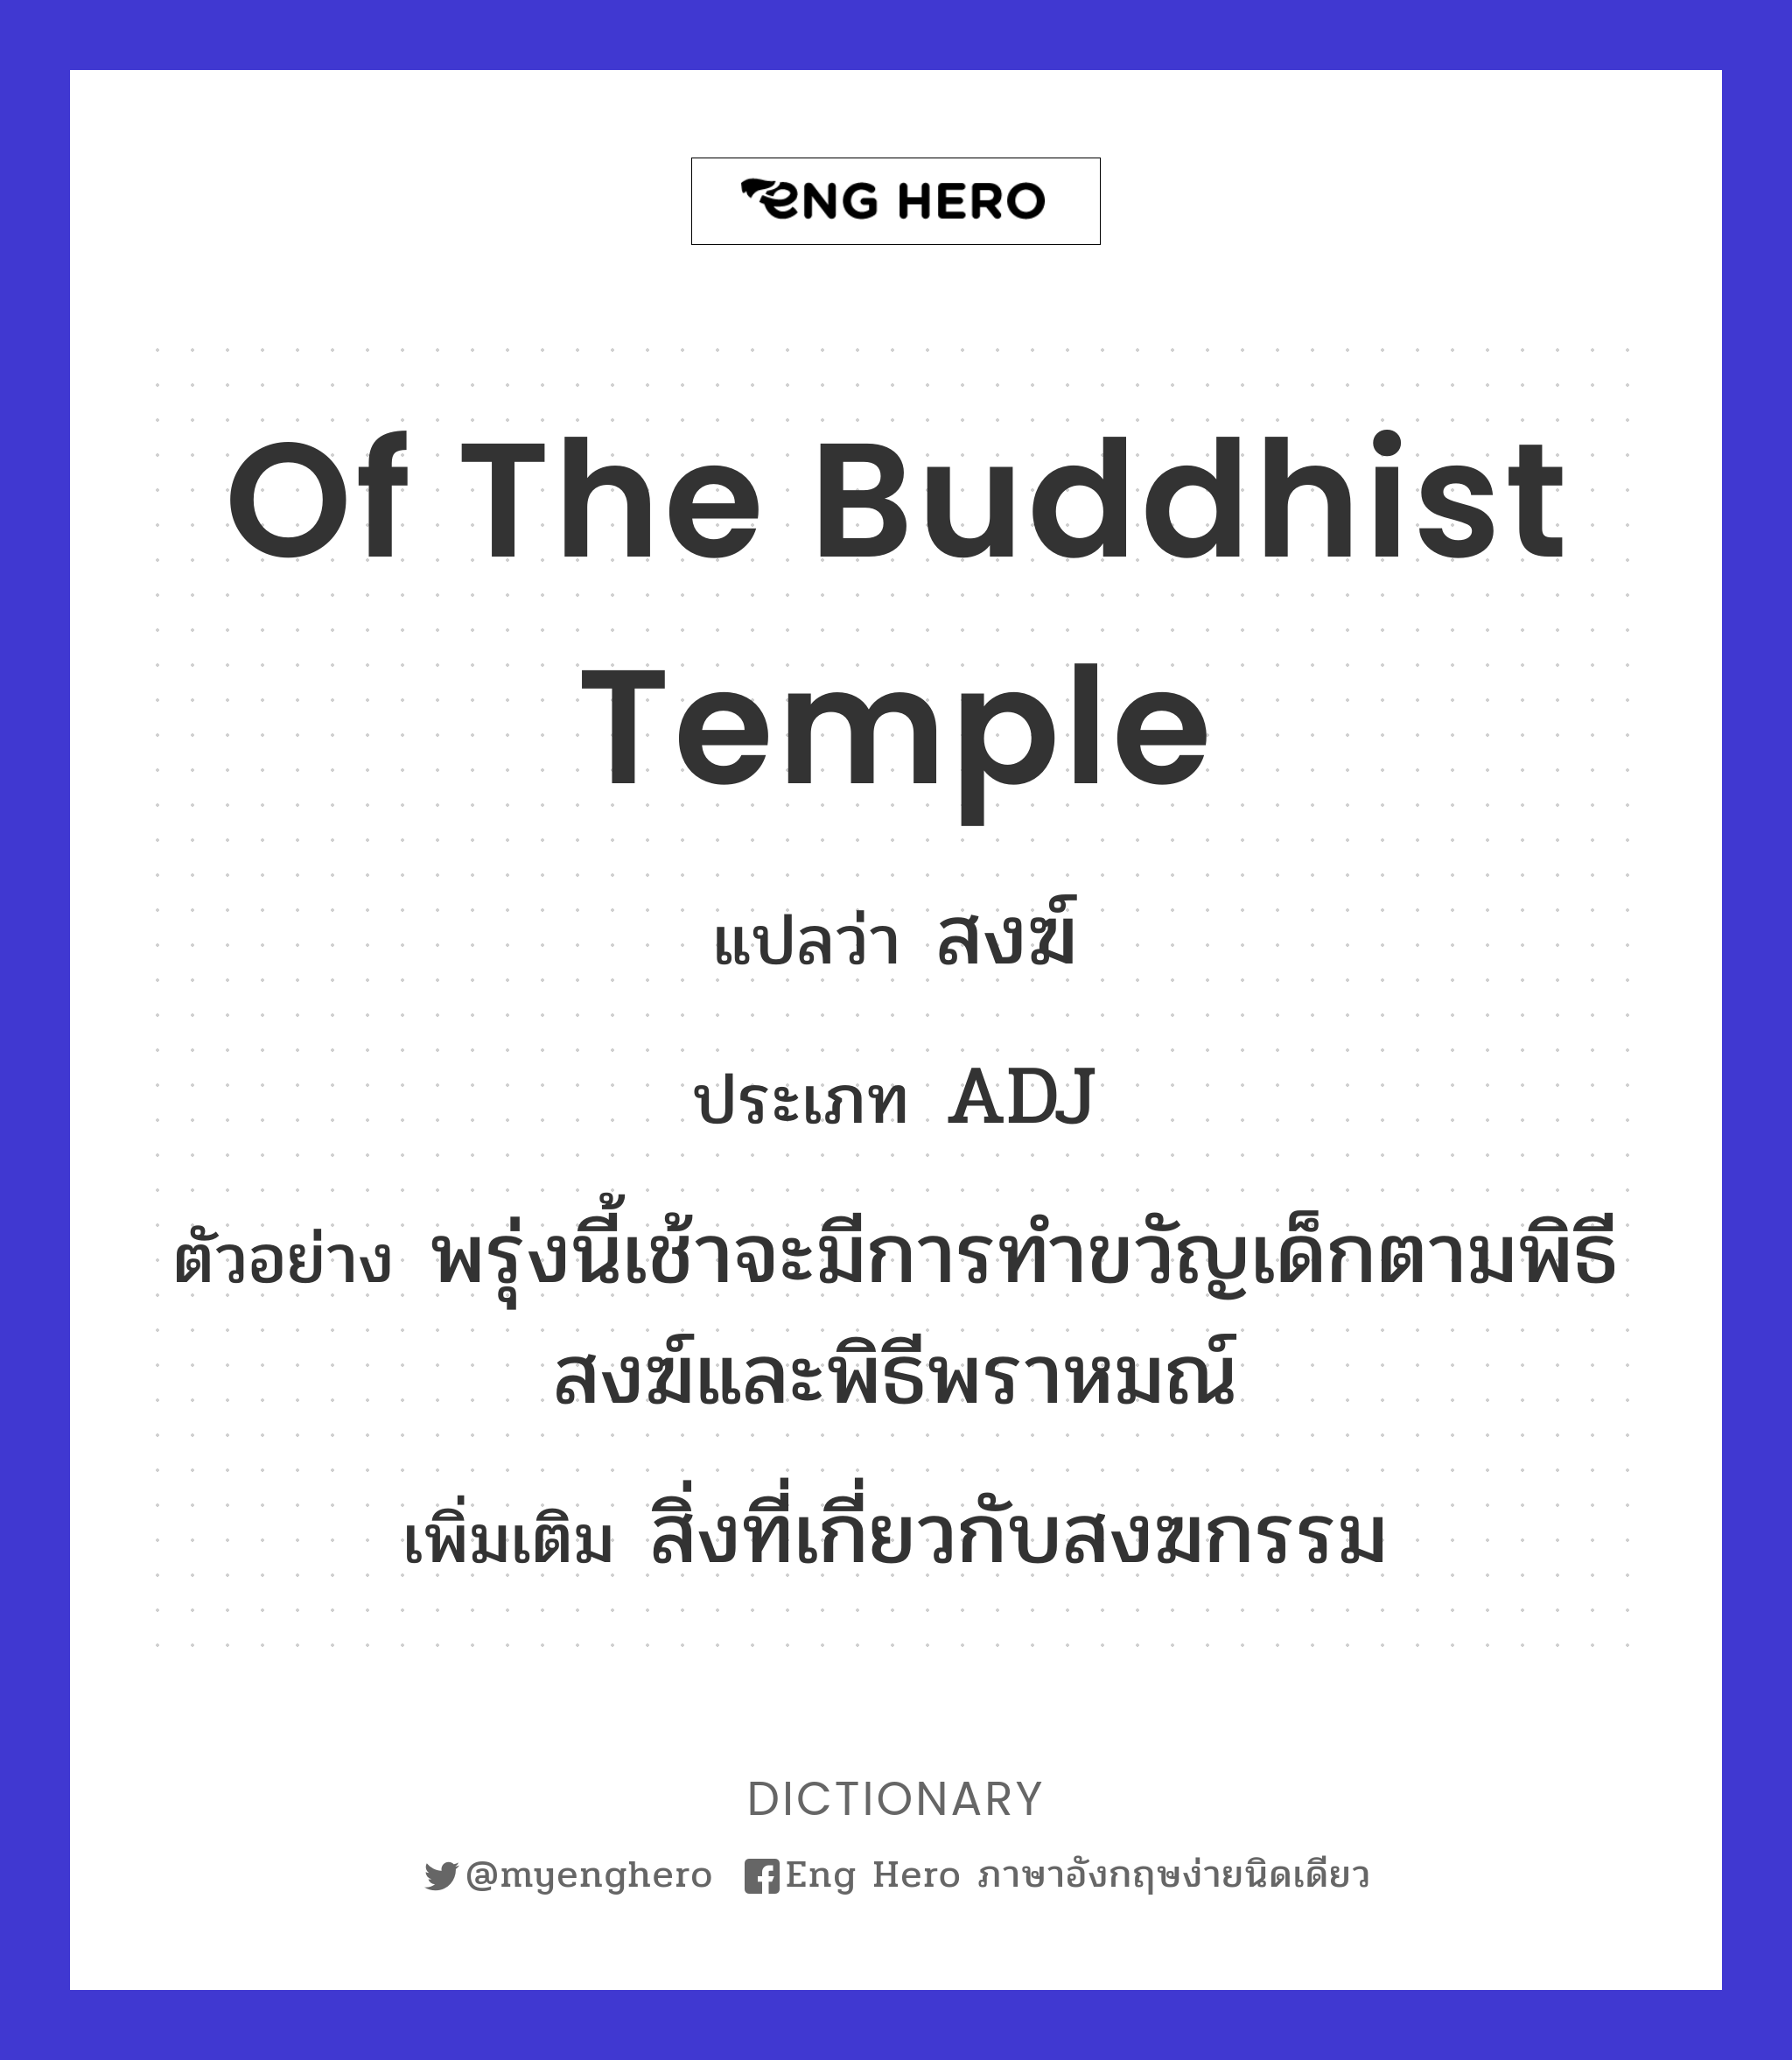 of the Buddhist temple